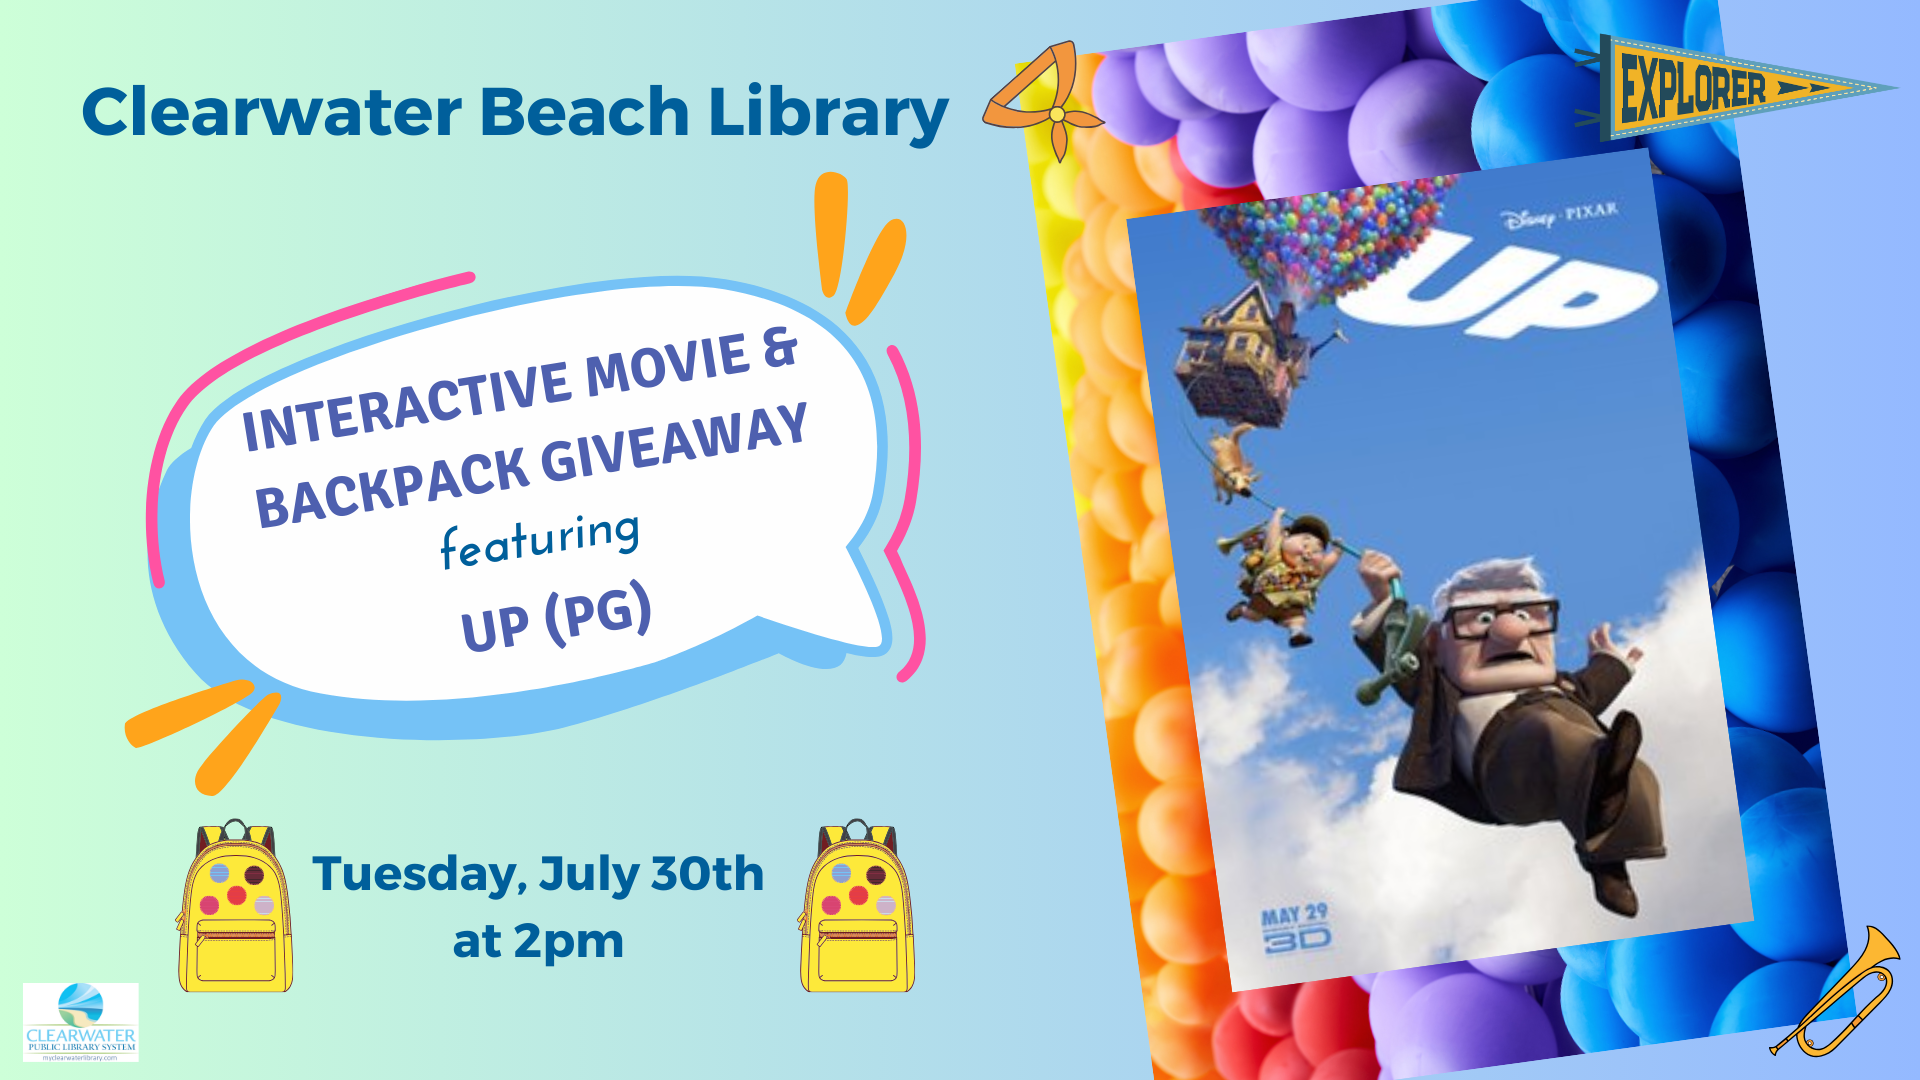 interactive movie - Up (PG)